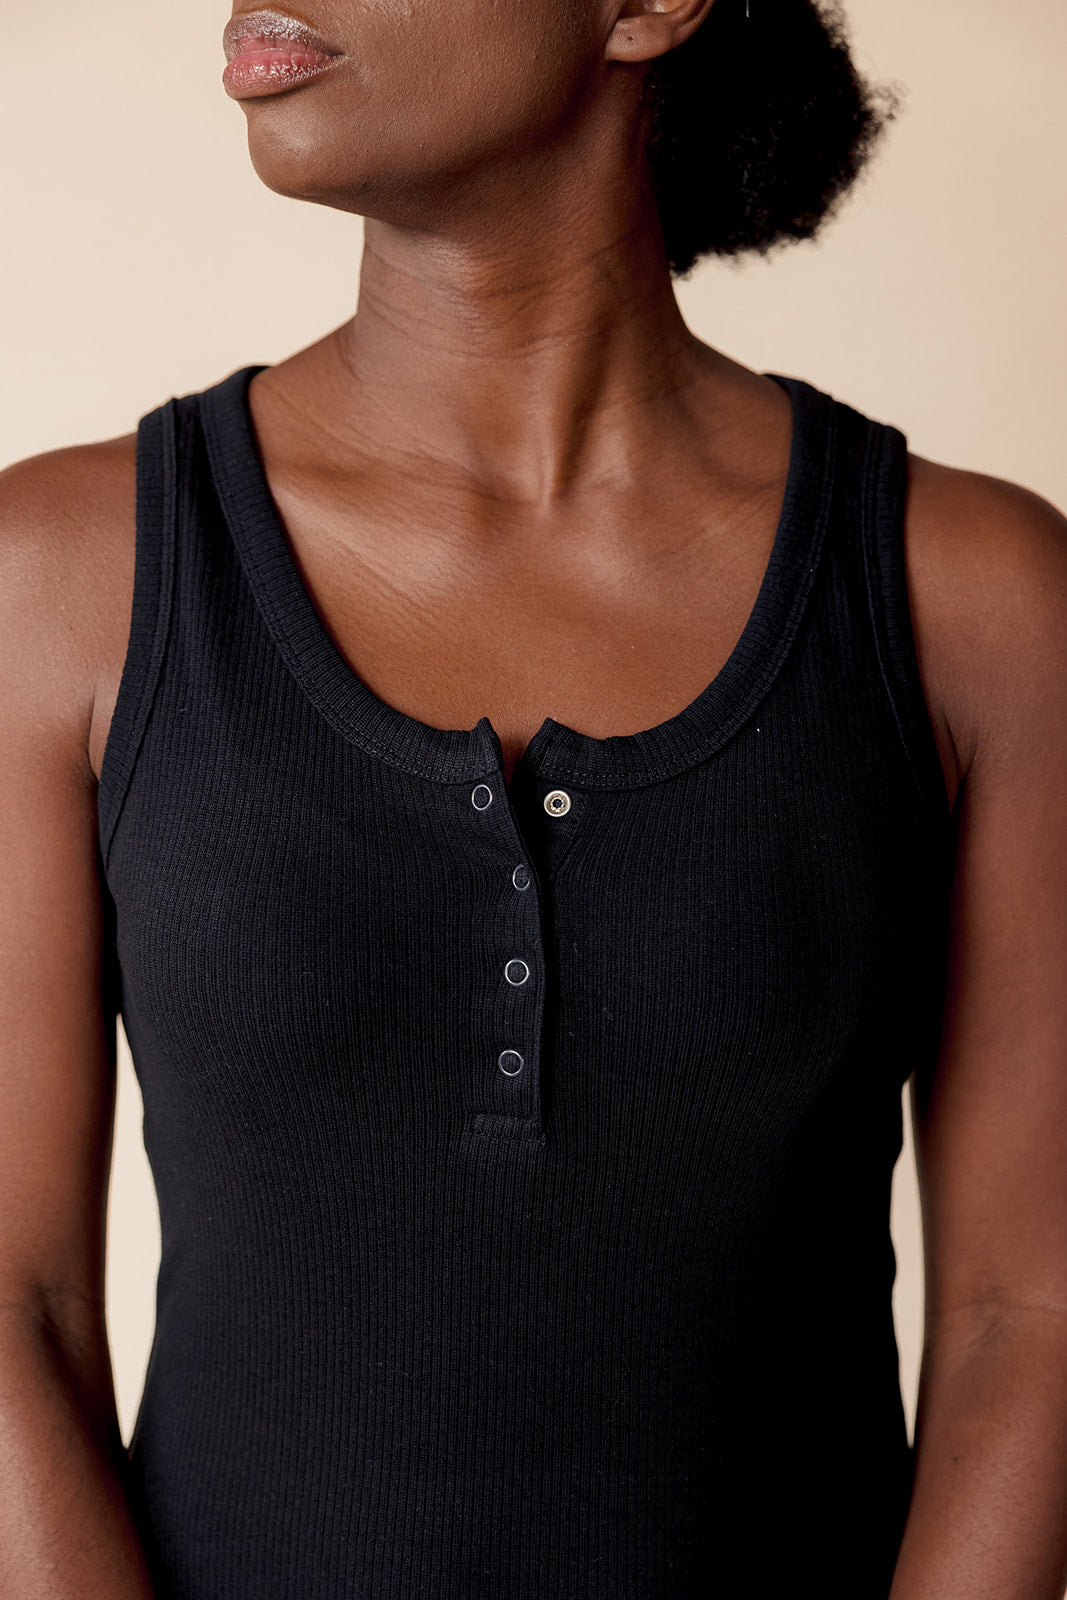 Women's Maternity Nursing Camisole made with Organic Cotton